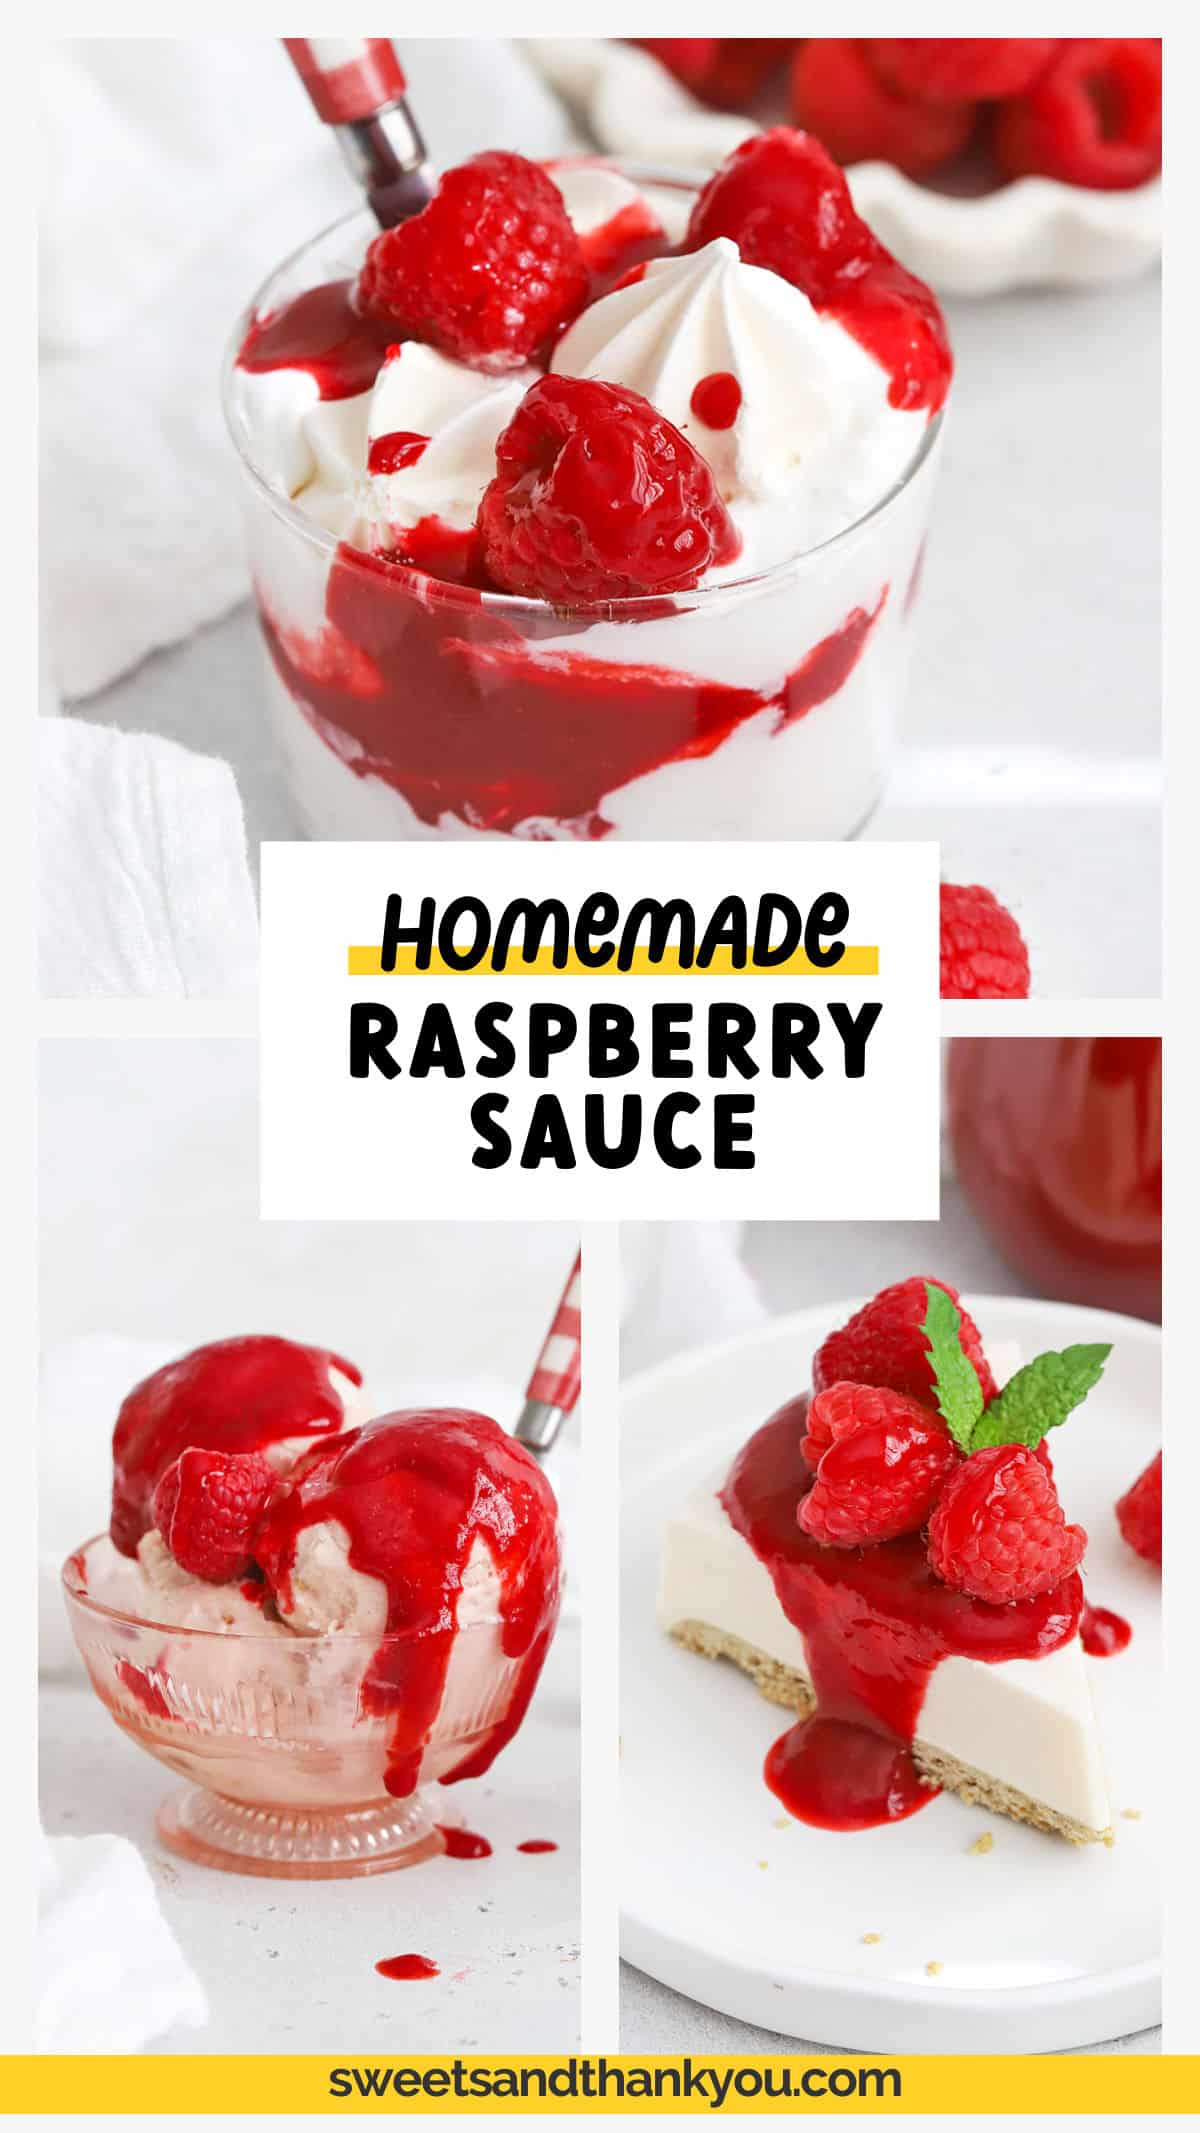 How to make Raspberry Coulis! This fresh raspberry sauce recipe adds vibrant fresh flavor to desserts, treats, breakfasts, and more! Try it as a topping for cake, a garnish to a dessert plate, or spoon over breakfast faves like waffles or french toast! It's the perfect raspberry sauce for cheesecake, ice cream, and more. Get the recipe for this homemade raspberry sauce (+delicious ways to use it!) at Sweets & Thank You